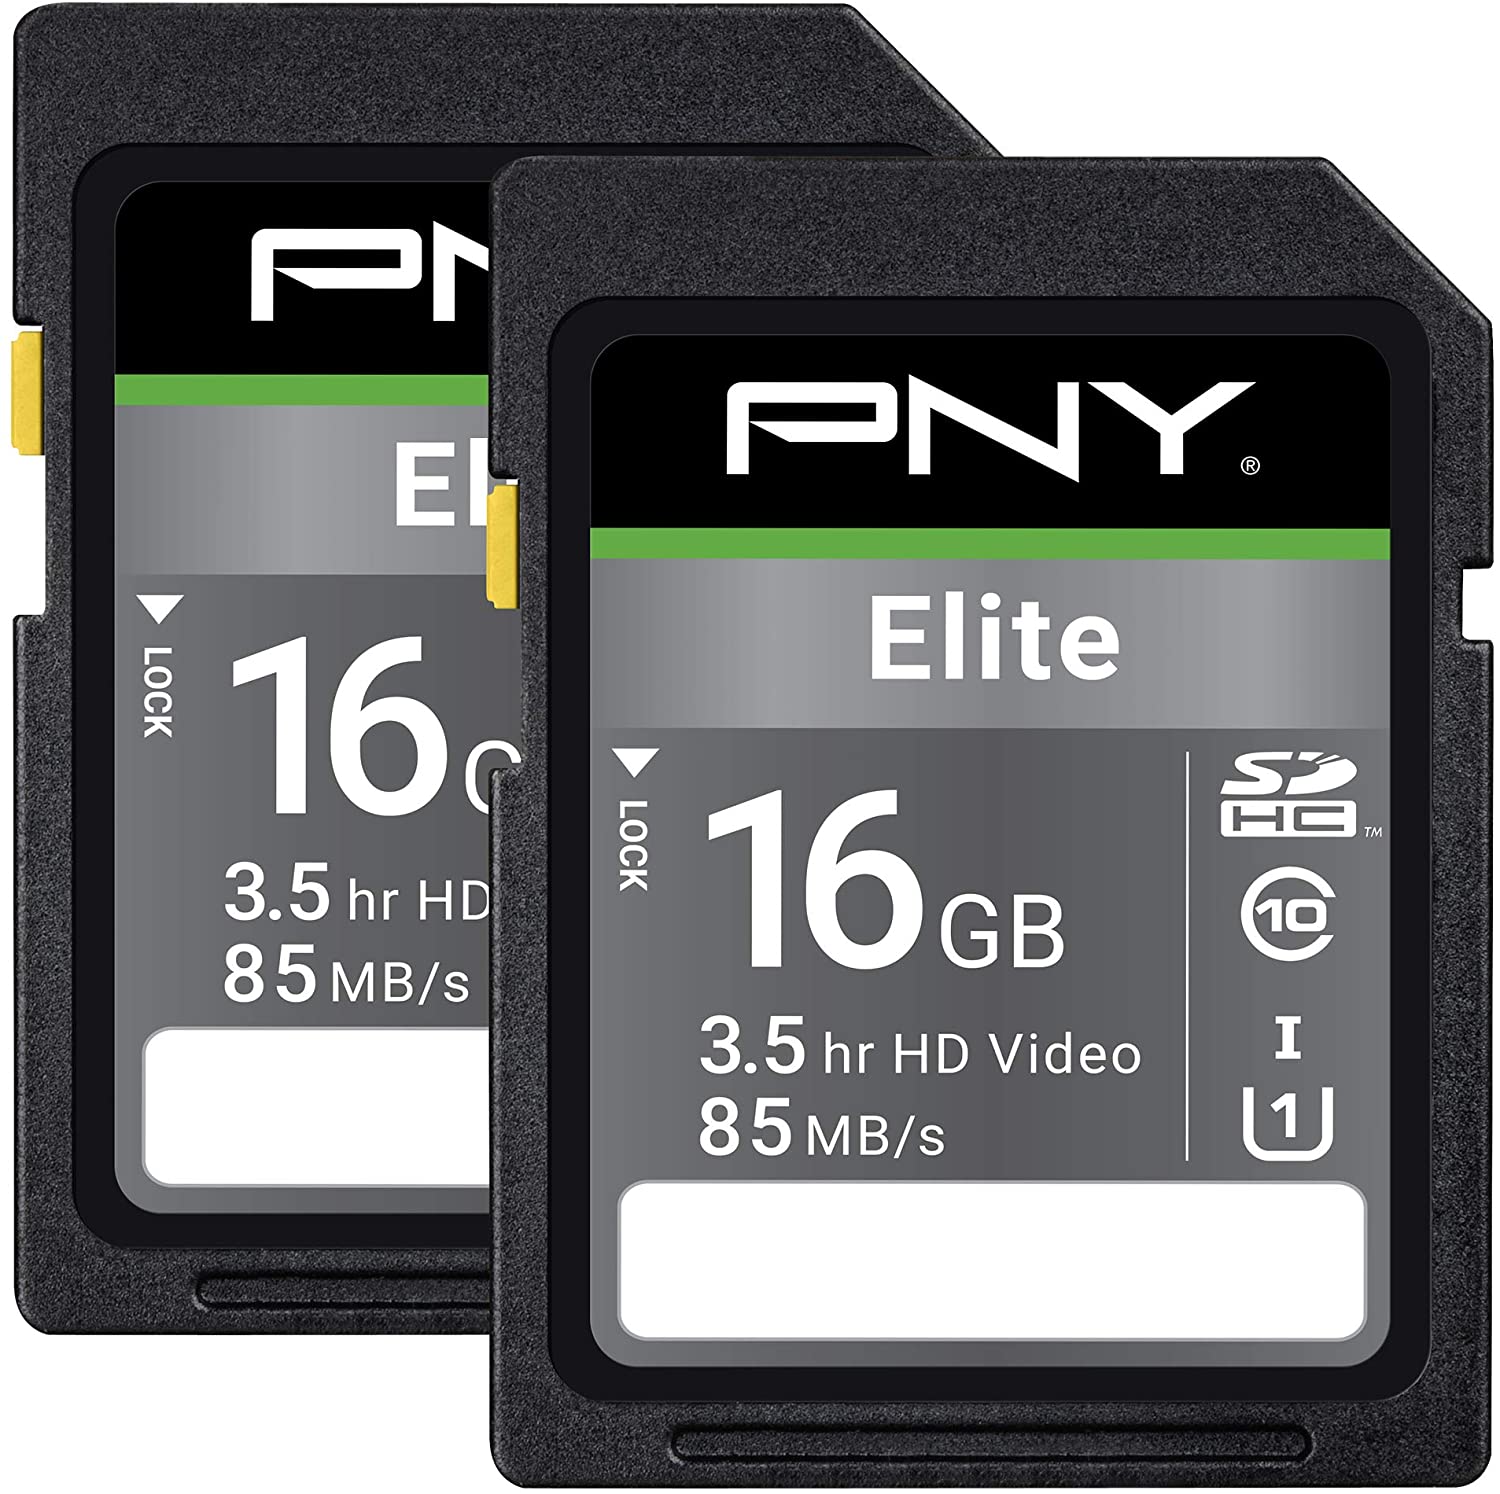 Update: Back Again!! - HOT!! - 2-Pack of PNY 16GB Elite Class 10 SDHC Flash Memory Card for Only ...